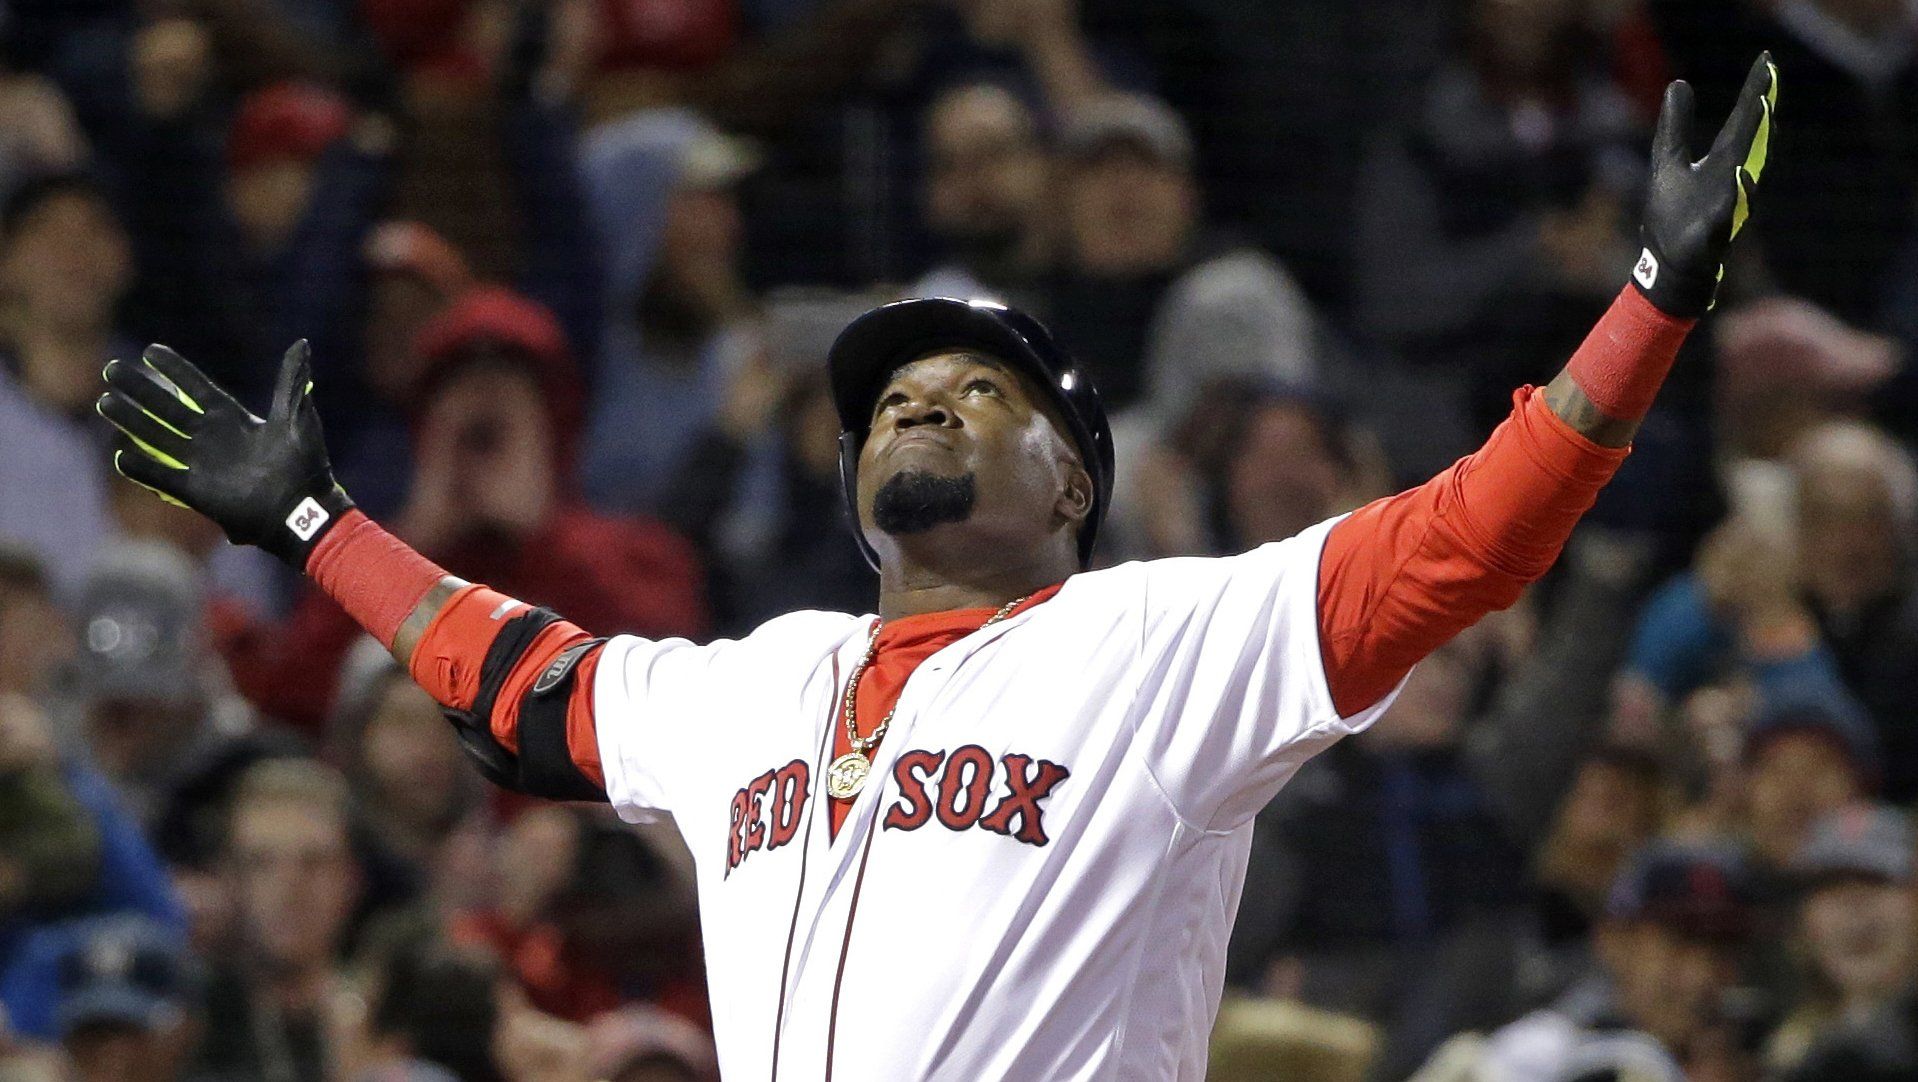 Red Sox will be out in force for David Ortiz's Hall of Fame induction